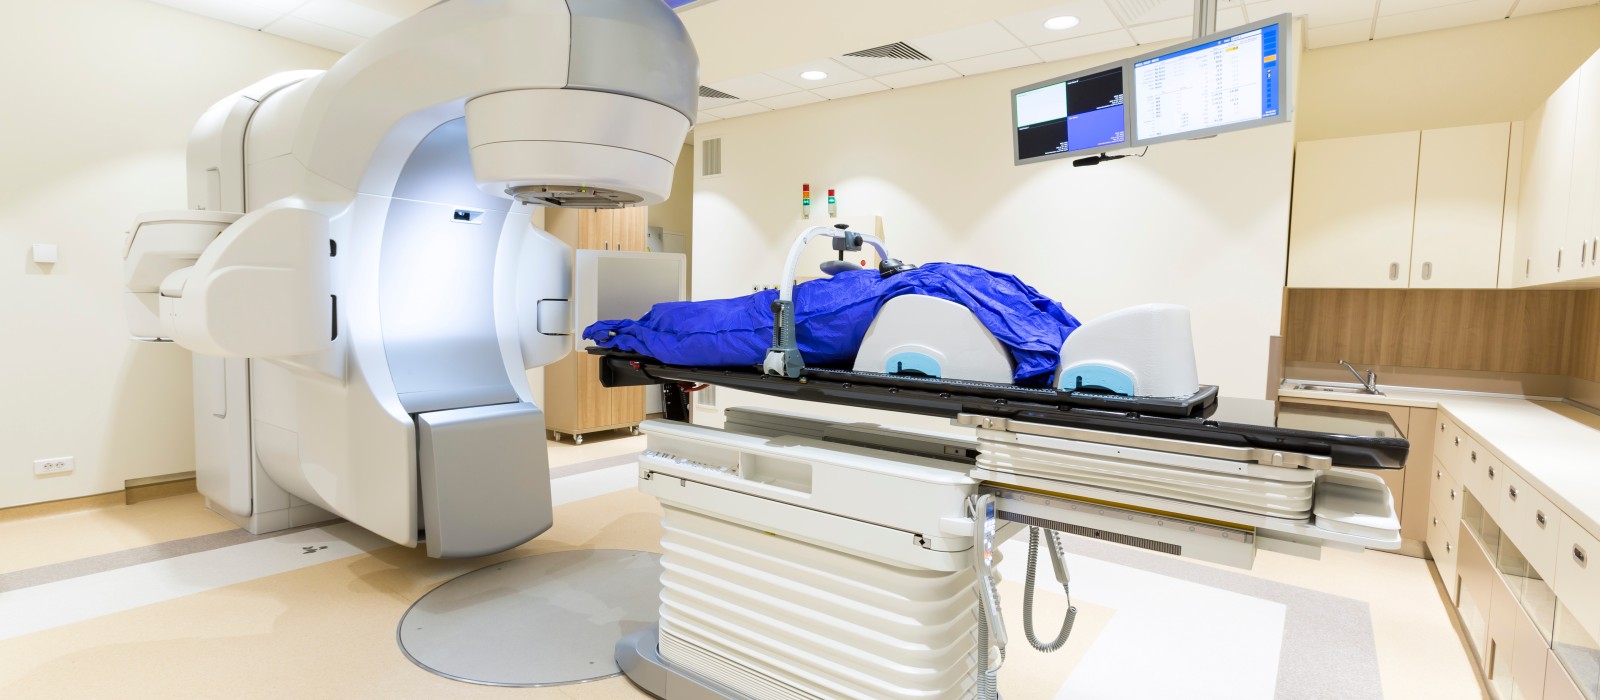 What Are the Main Types of Radiation Therapy?